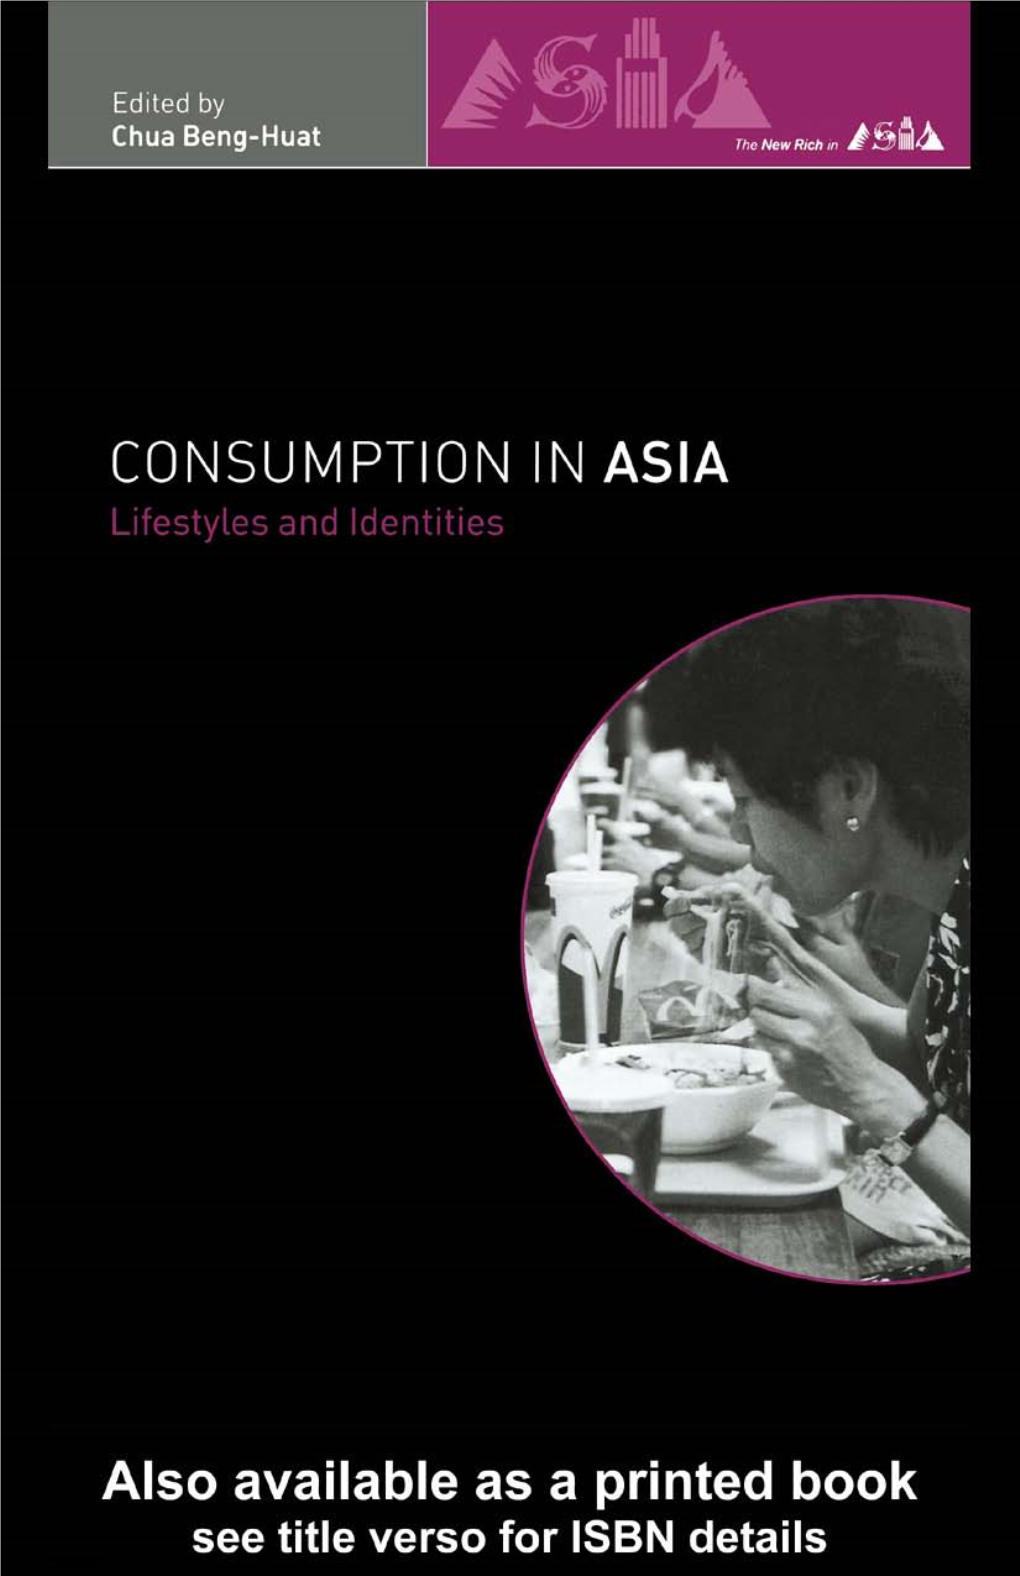 Consumption in Asia: Lifestyles and Identities/Chua Beng-Huat